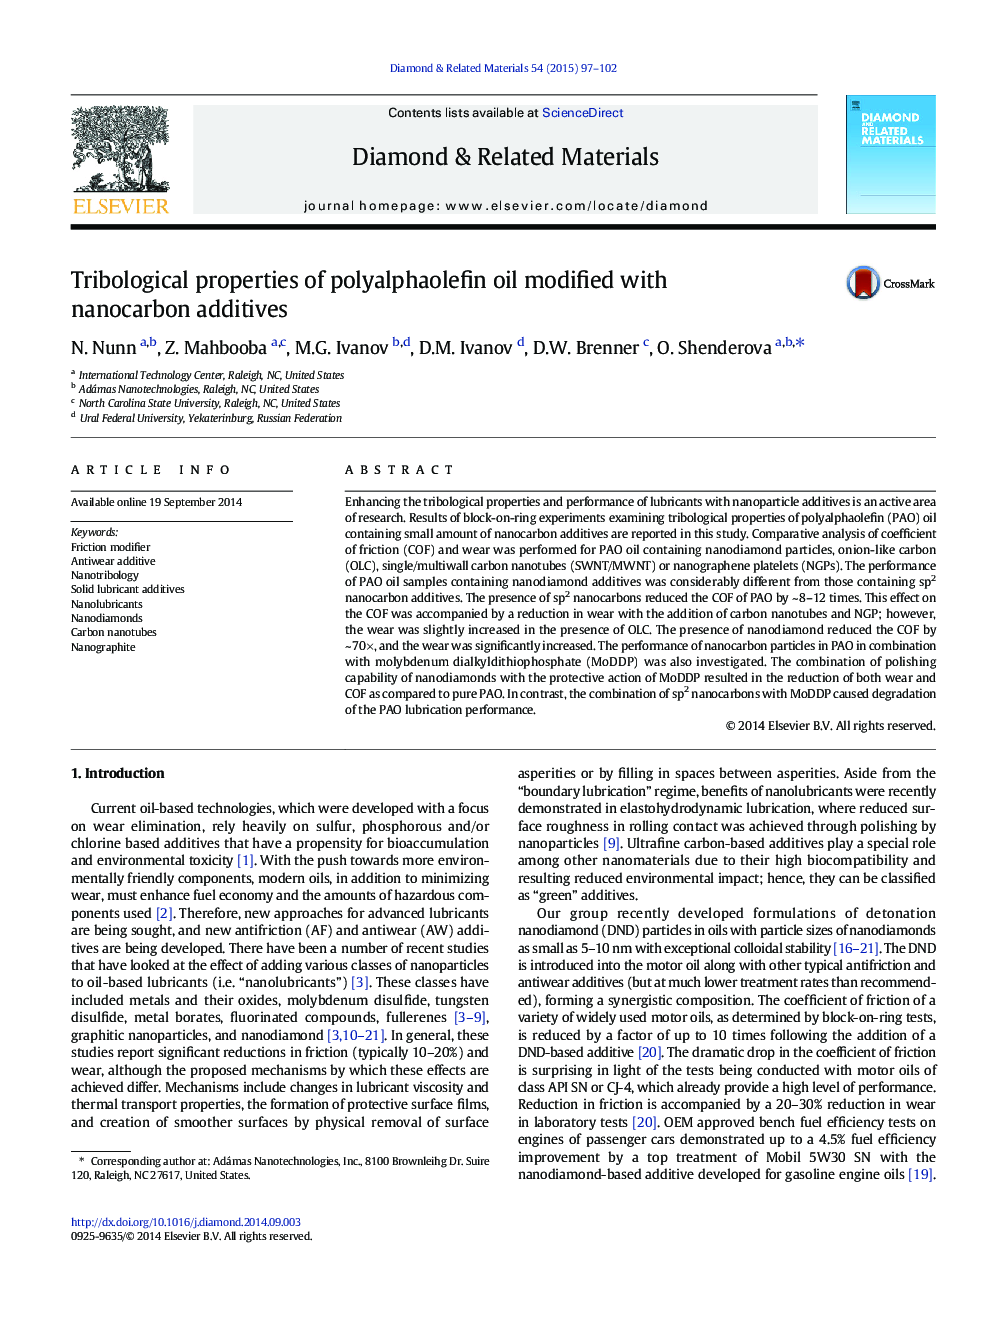 Tribological properties of polyalphaolefin oil modified with nanocarbon additives